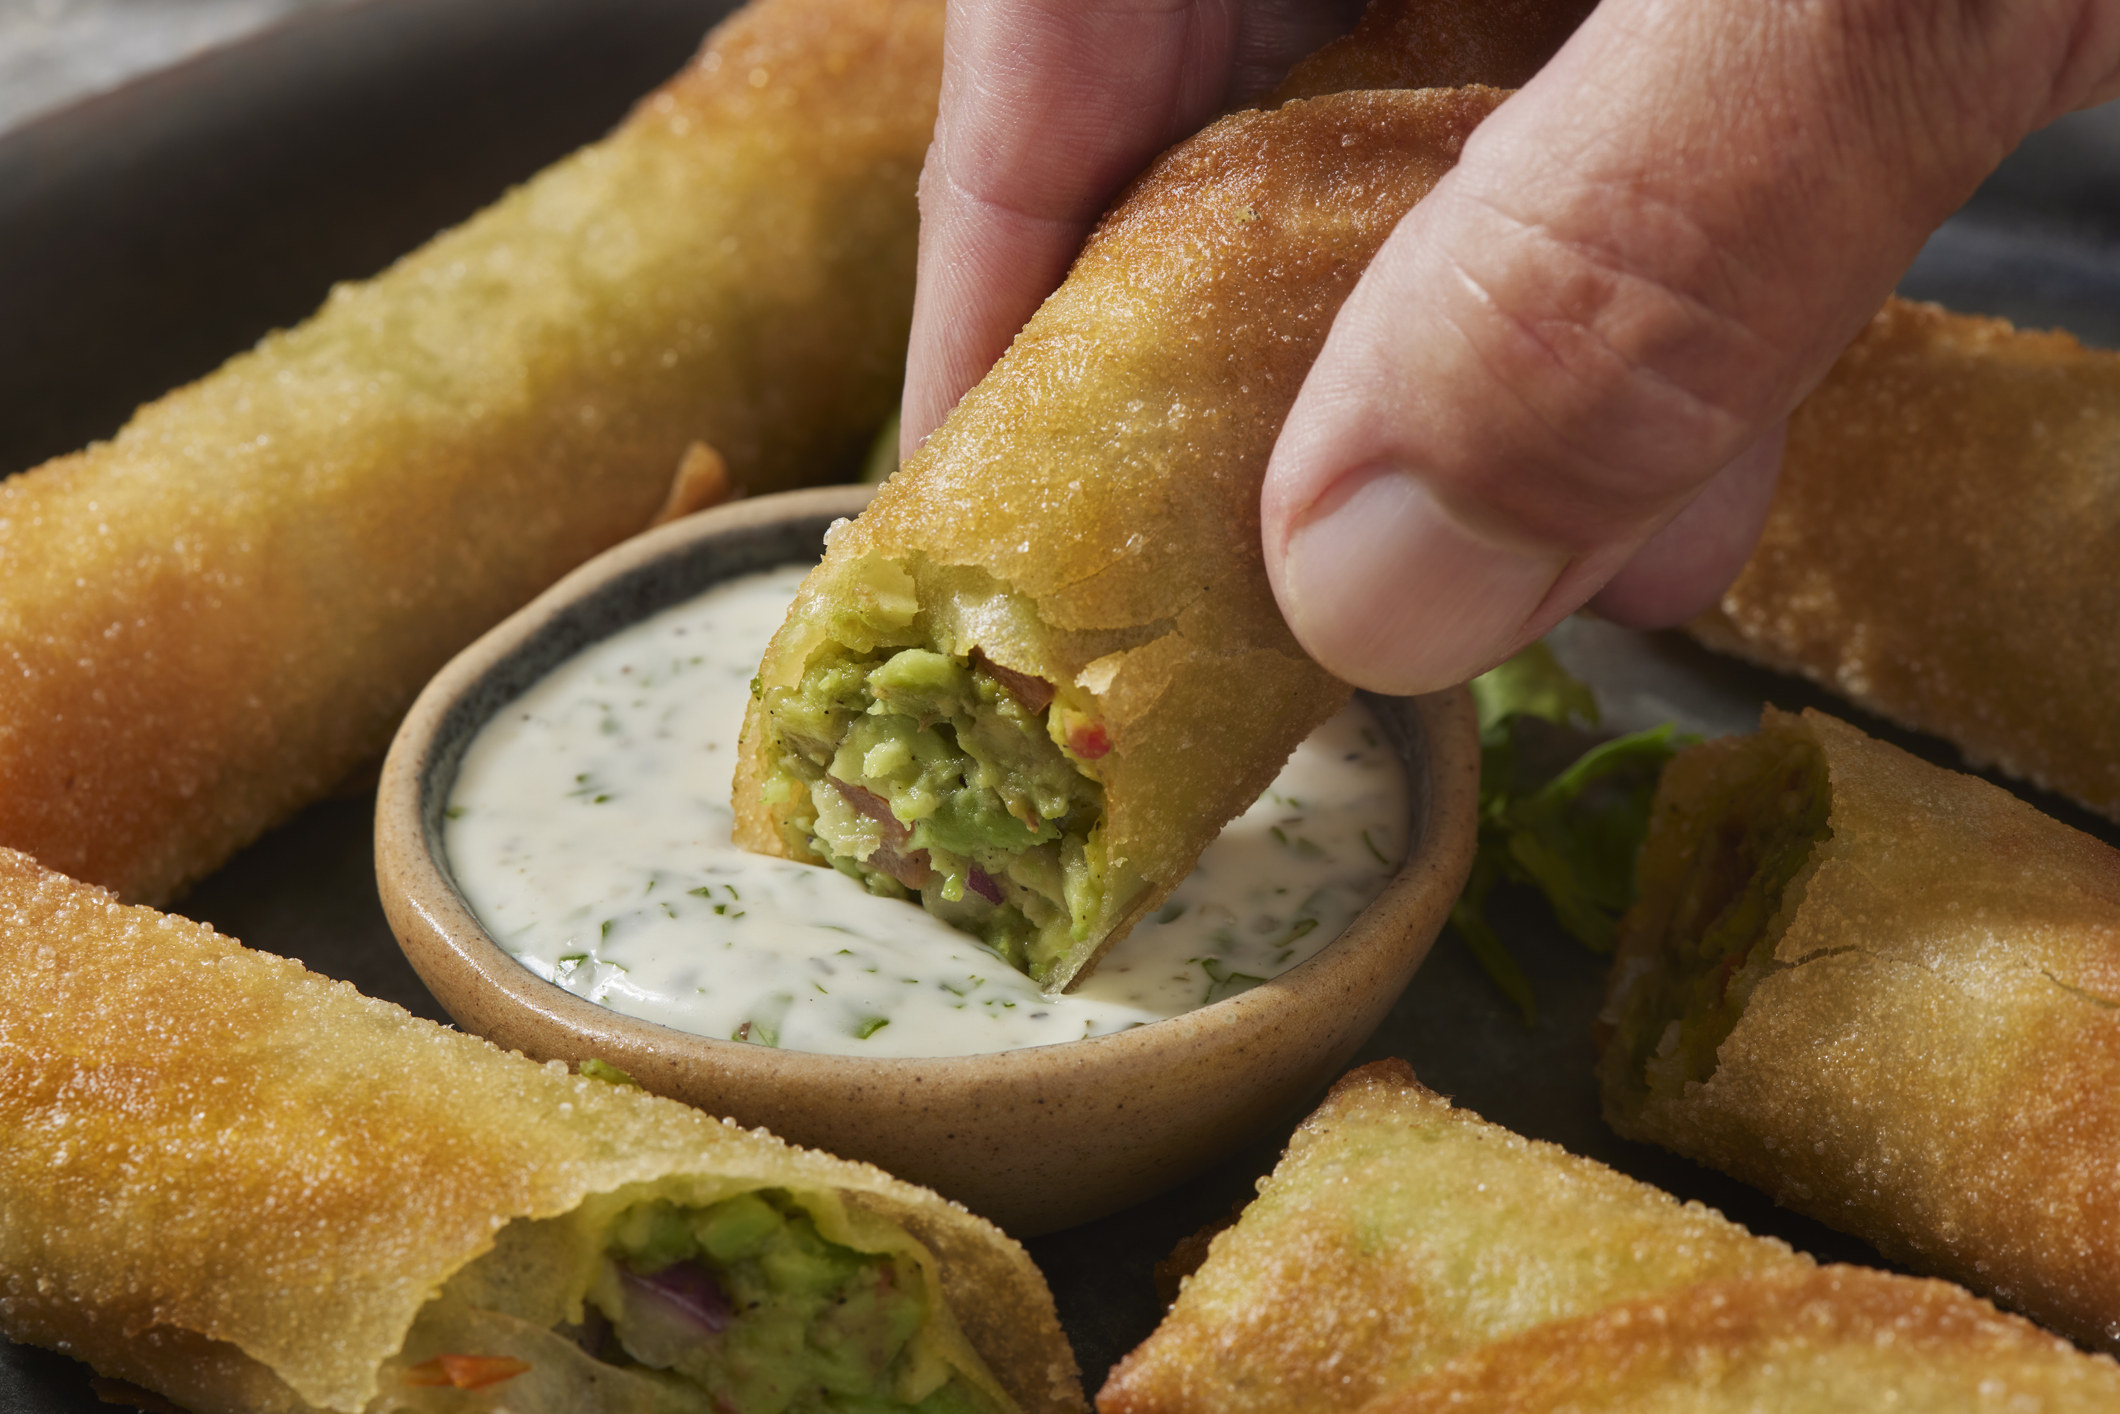 Dipping a spring roll into ranch dressing